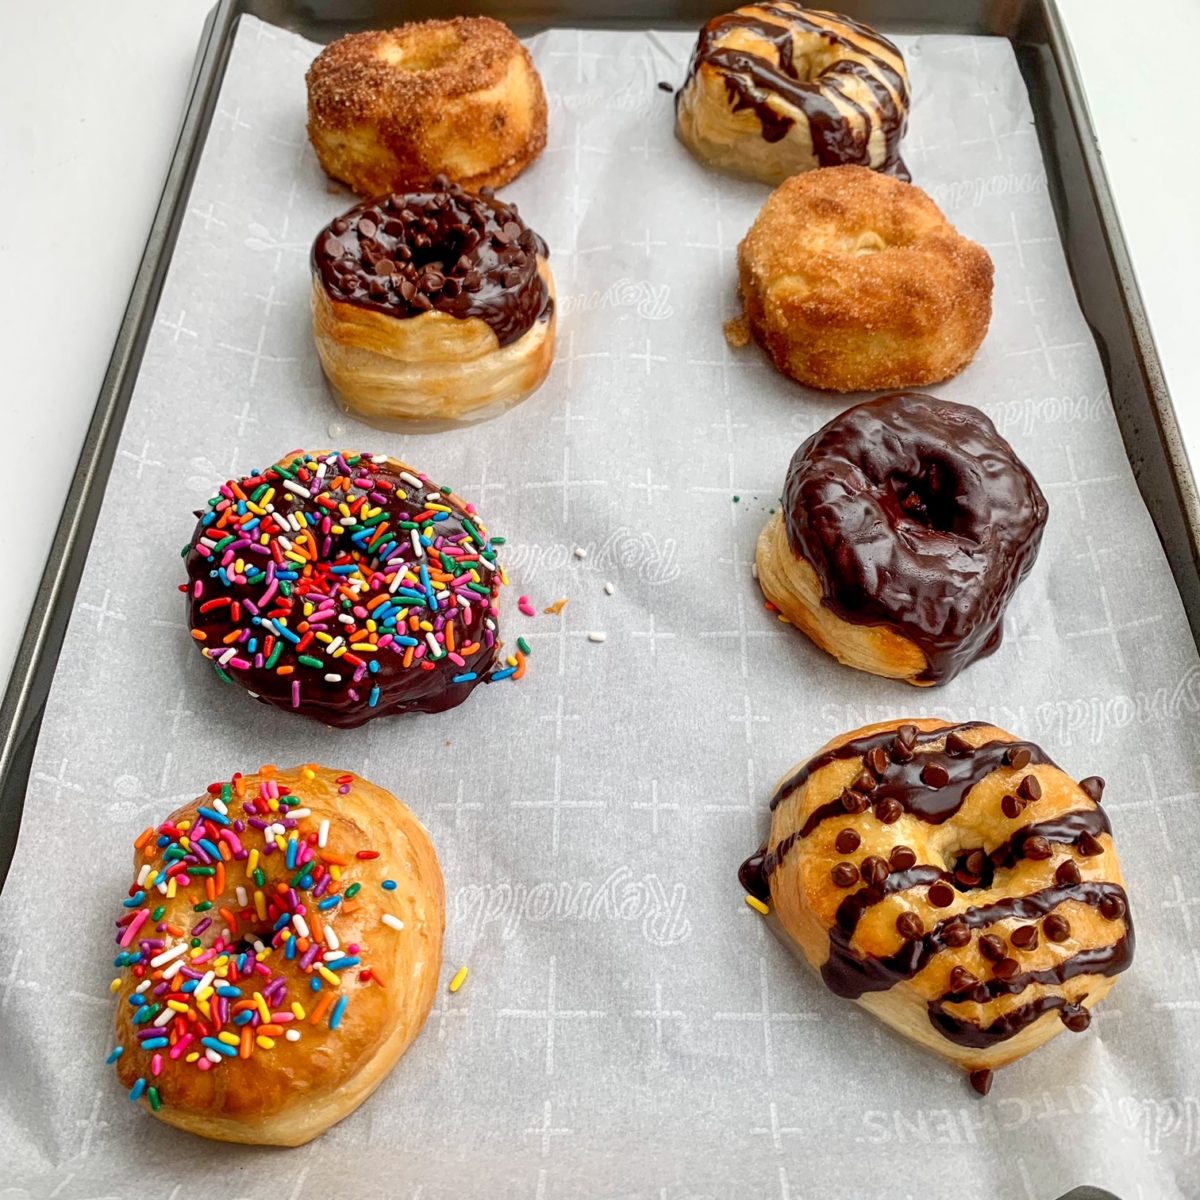 easy air fryer donuts made with no oil will make everyone smile